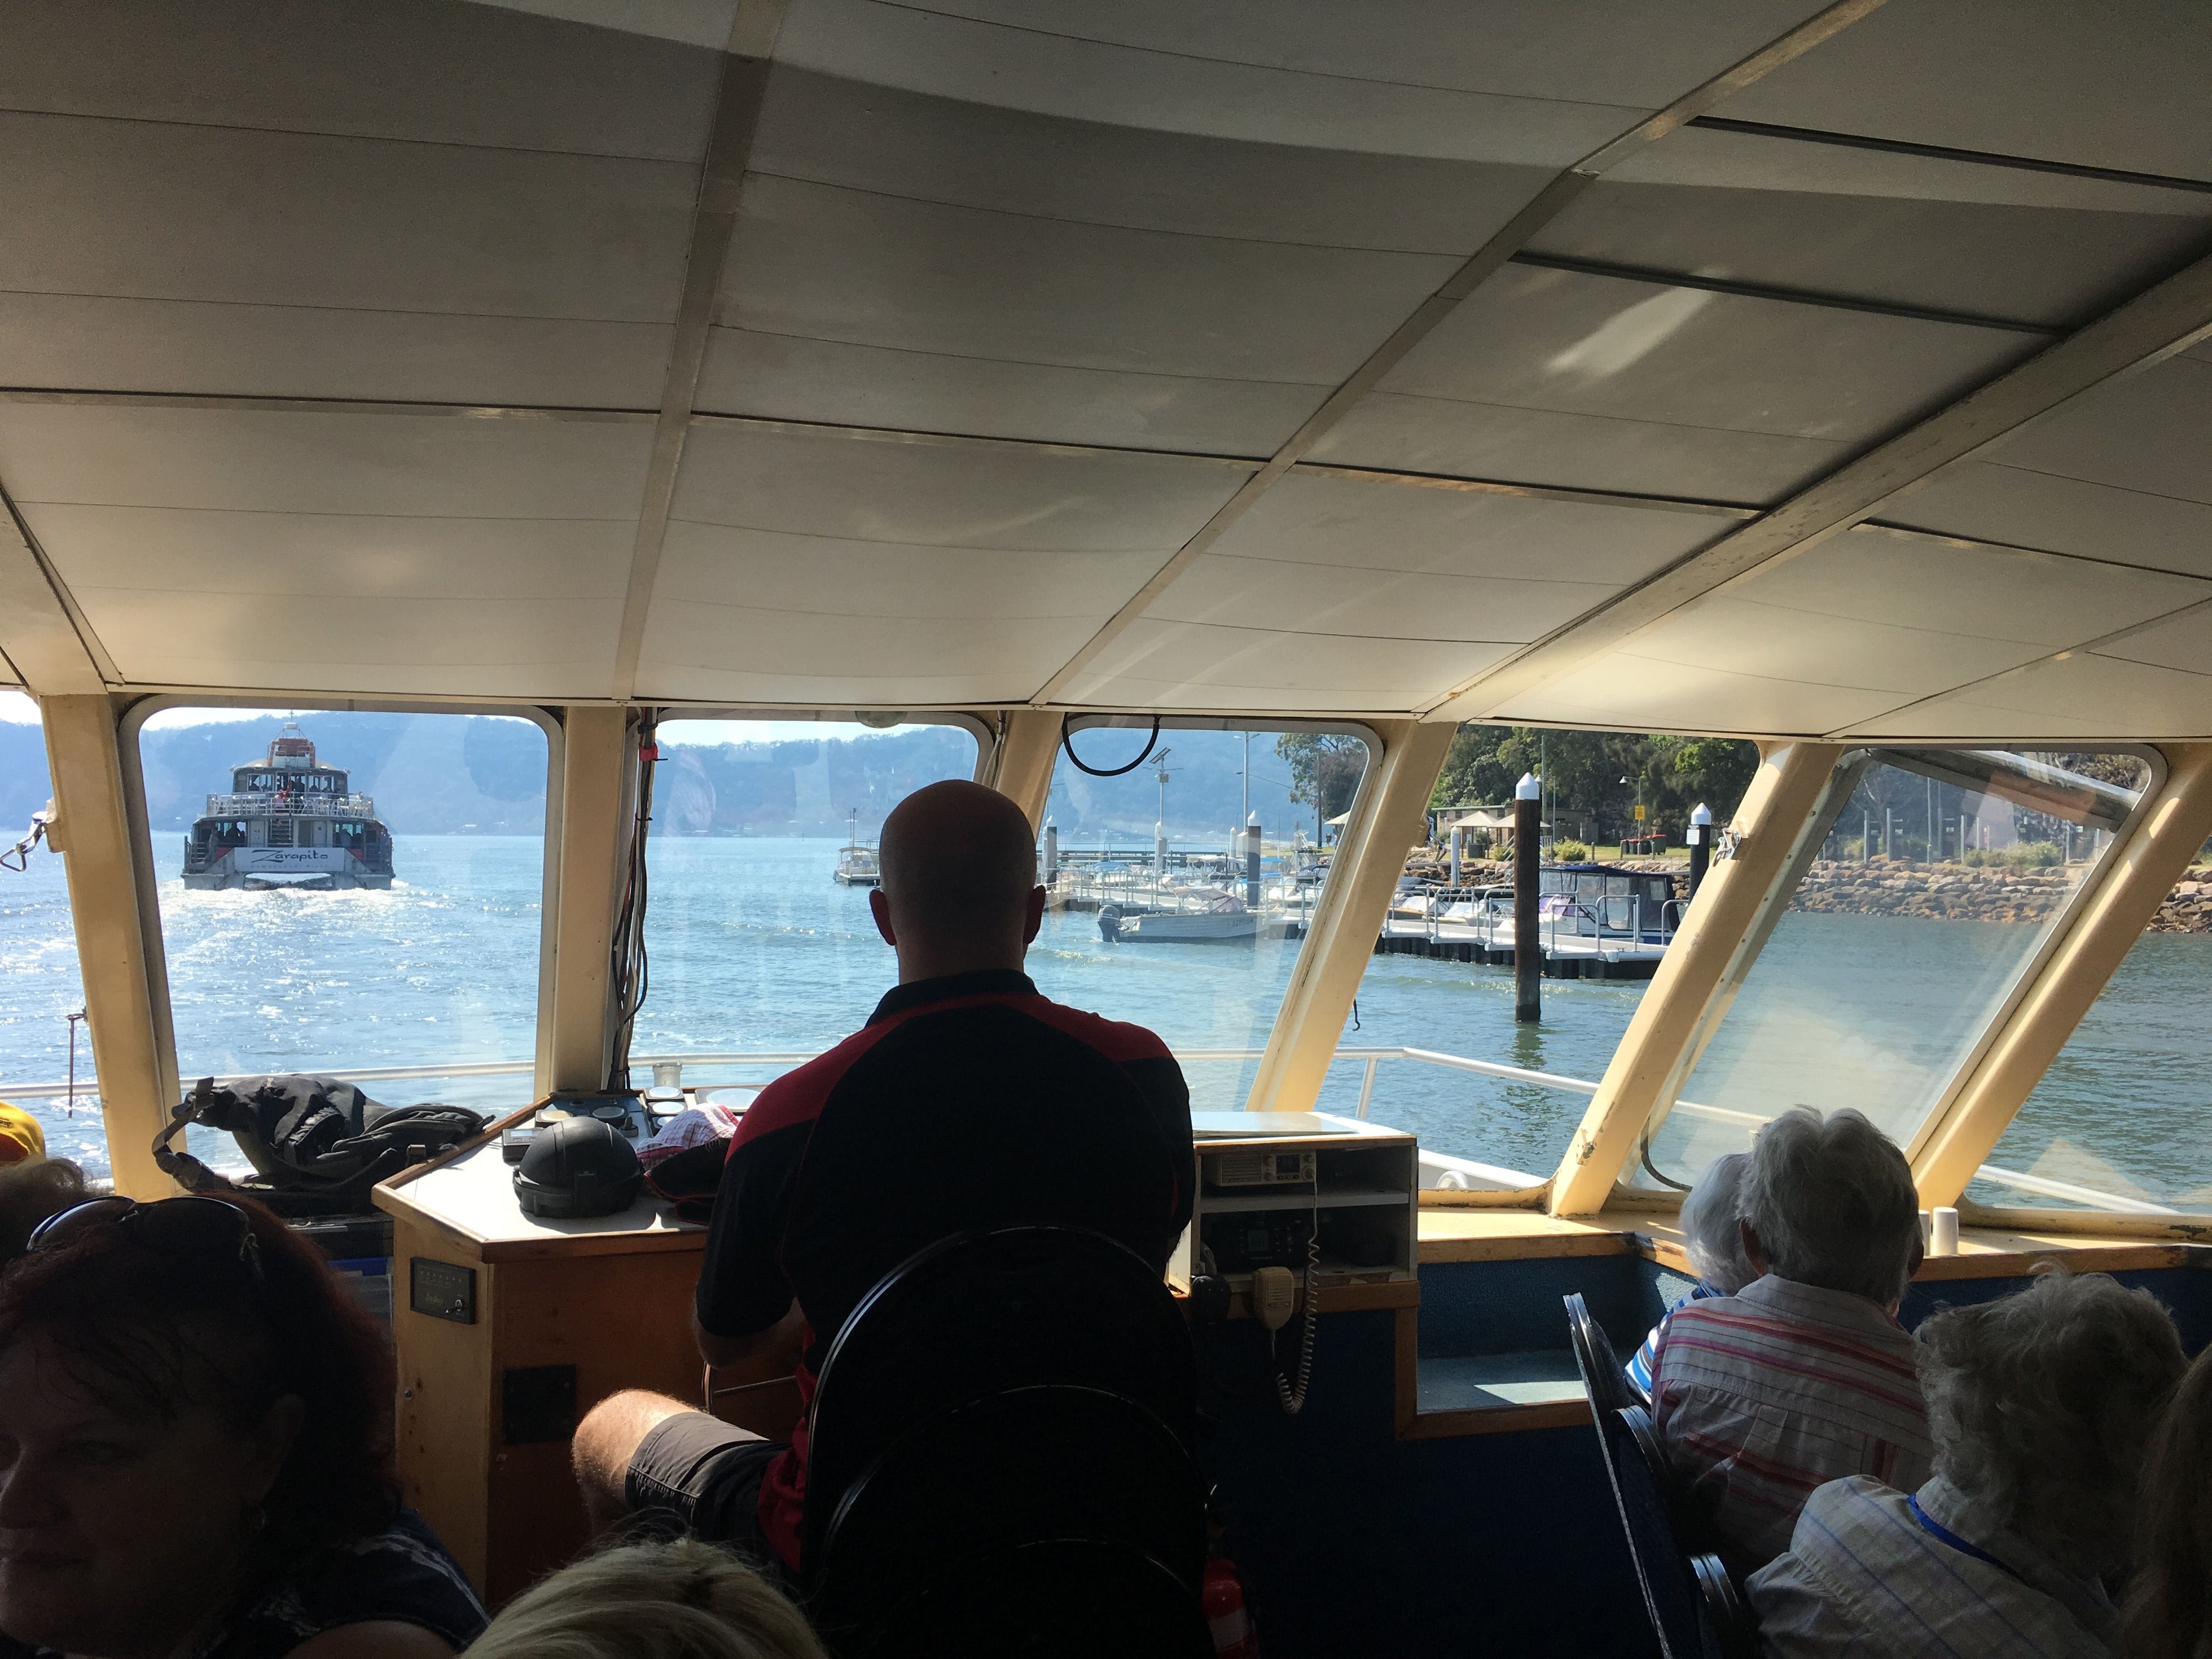 The Riverboat Postman Public Day Tour 25th October 2019 Image -5db366da522bf